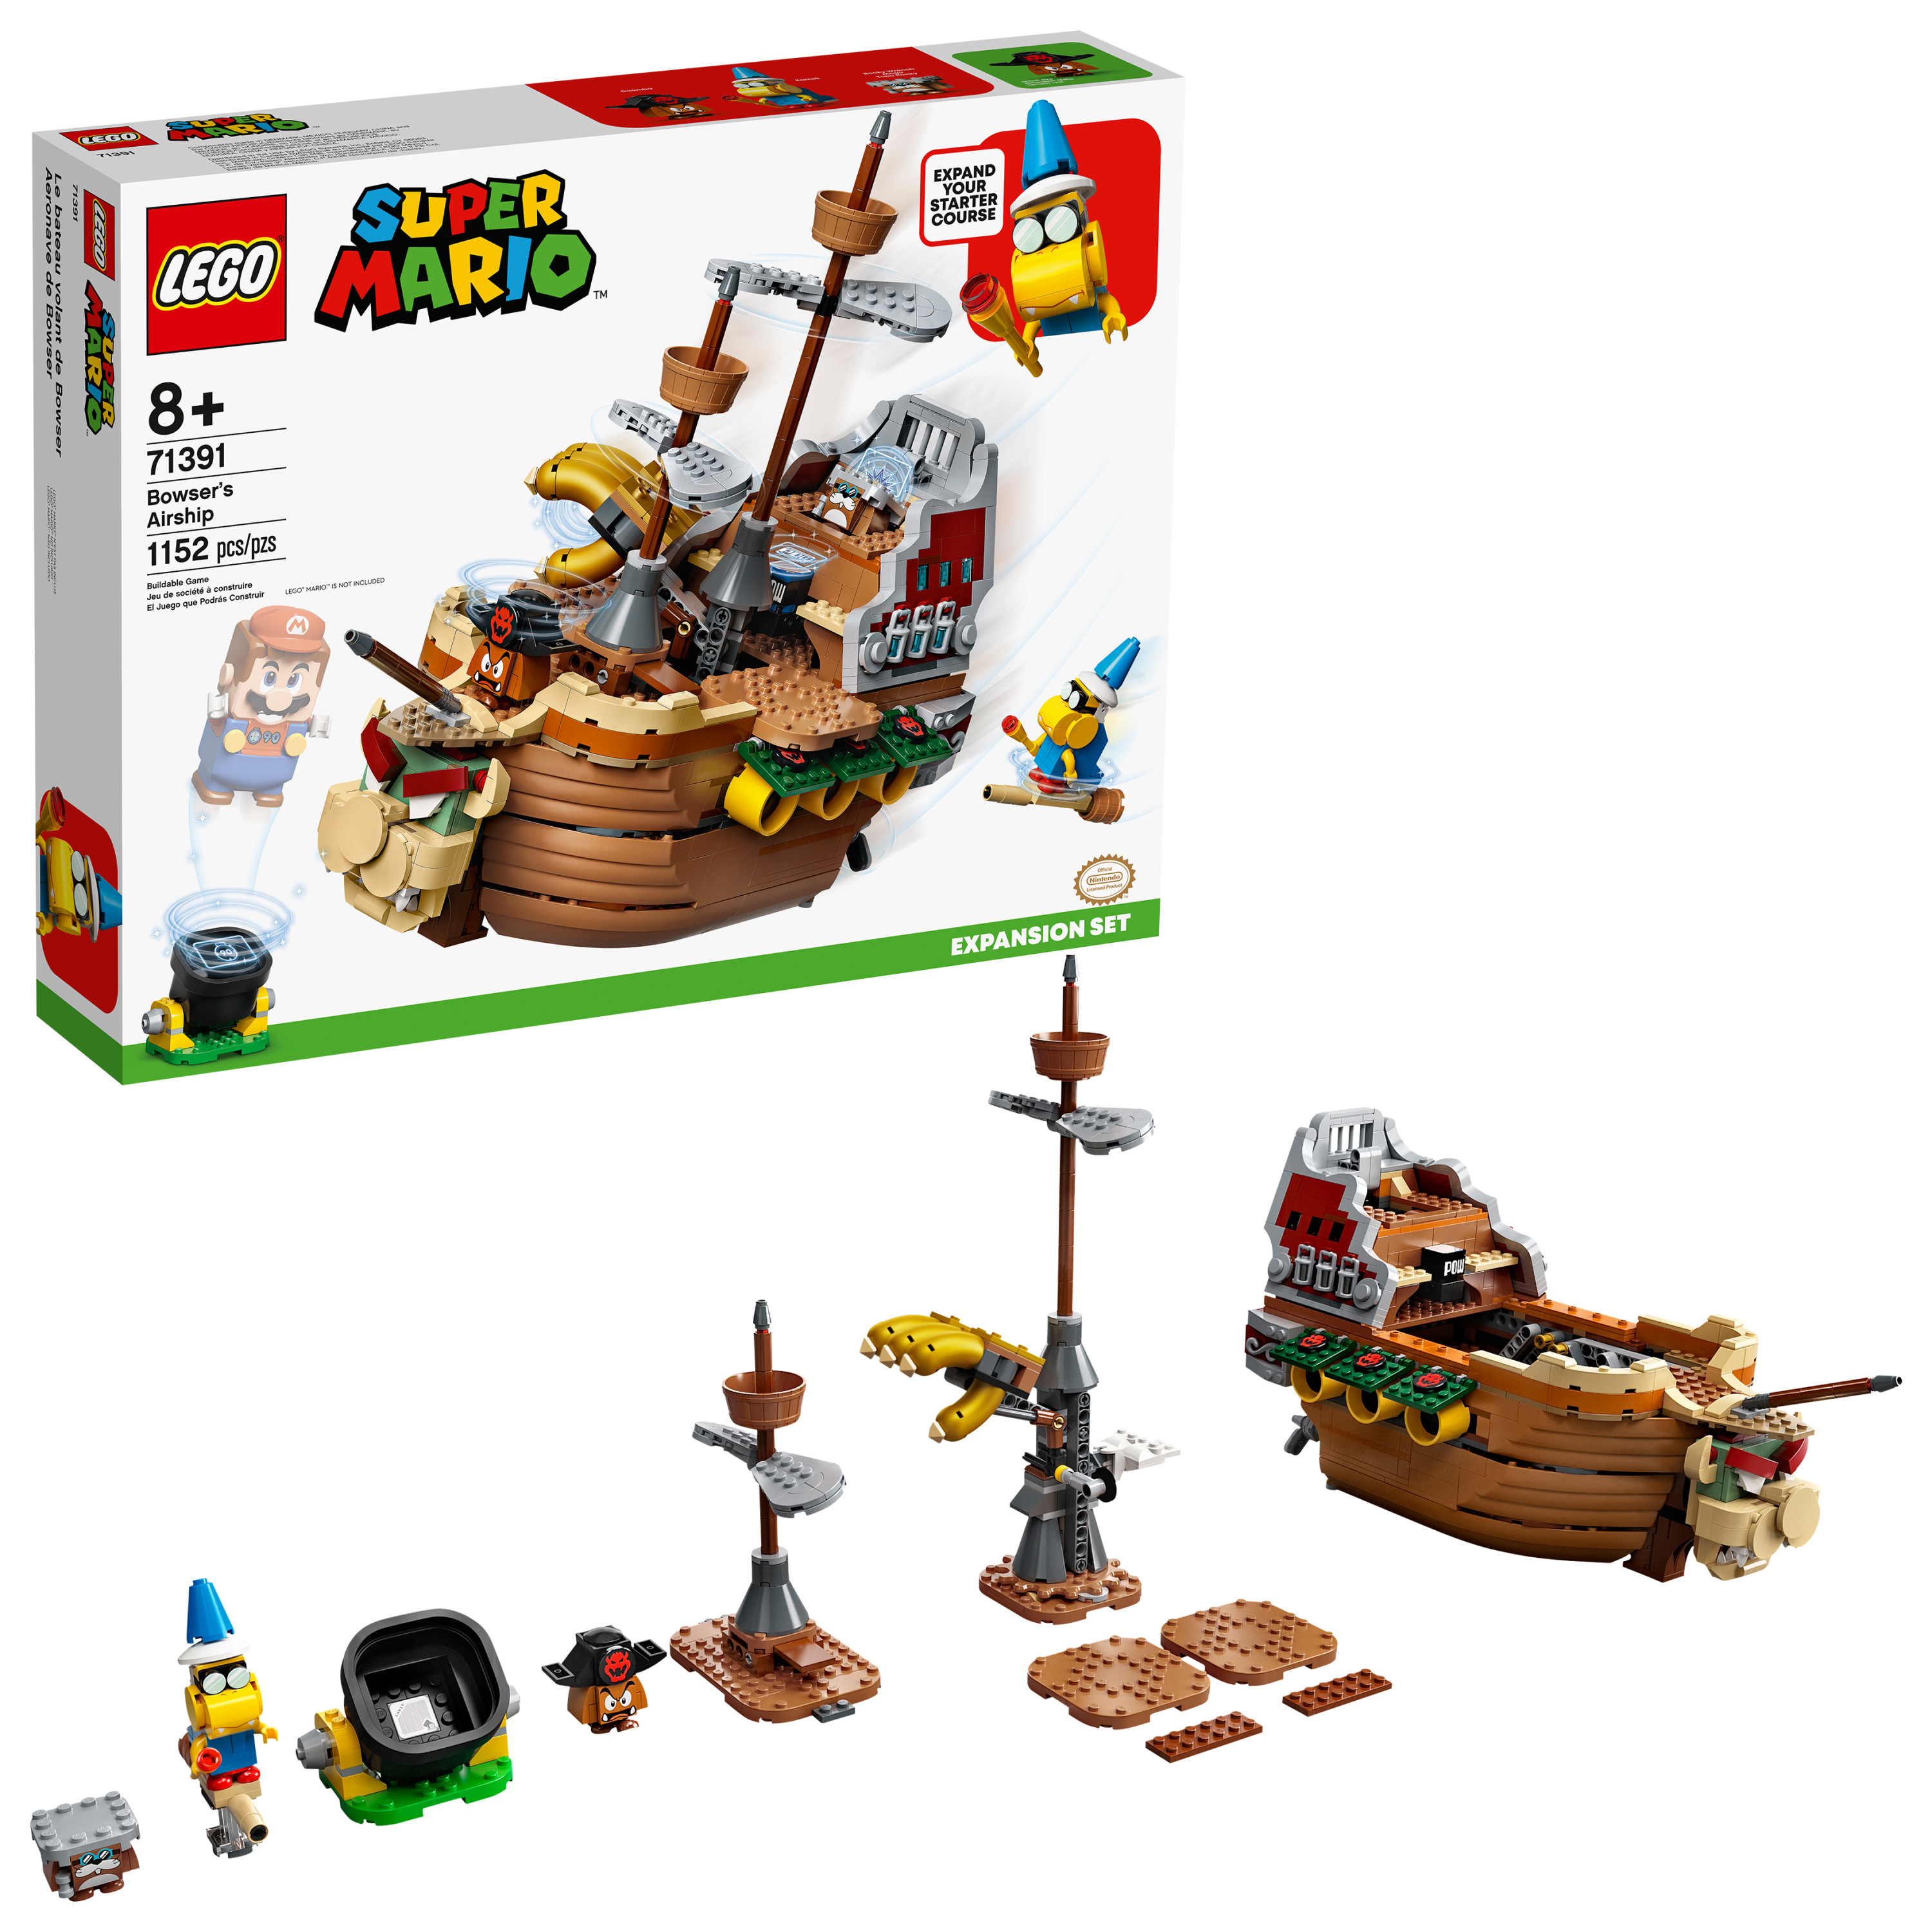 LEGO Super Mario Bowser’s Airship Expansion Set 71391 Building Toy for Kids (1,152 Pieces) - image 1 of 7